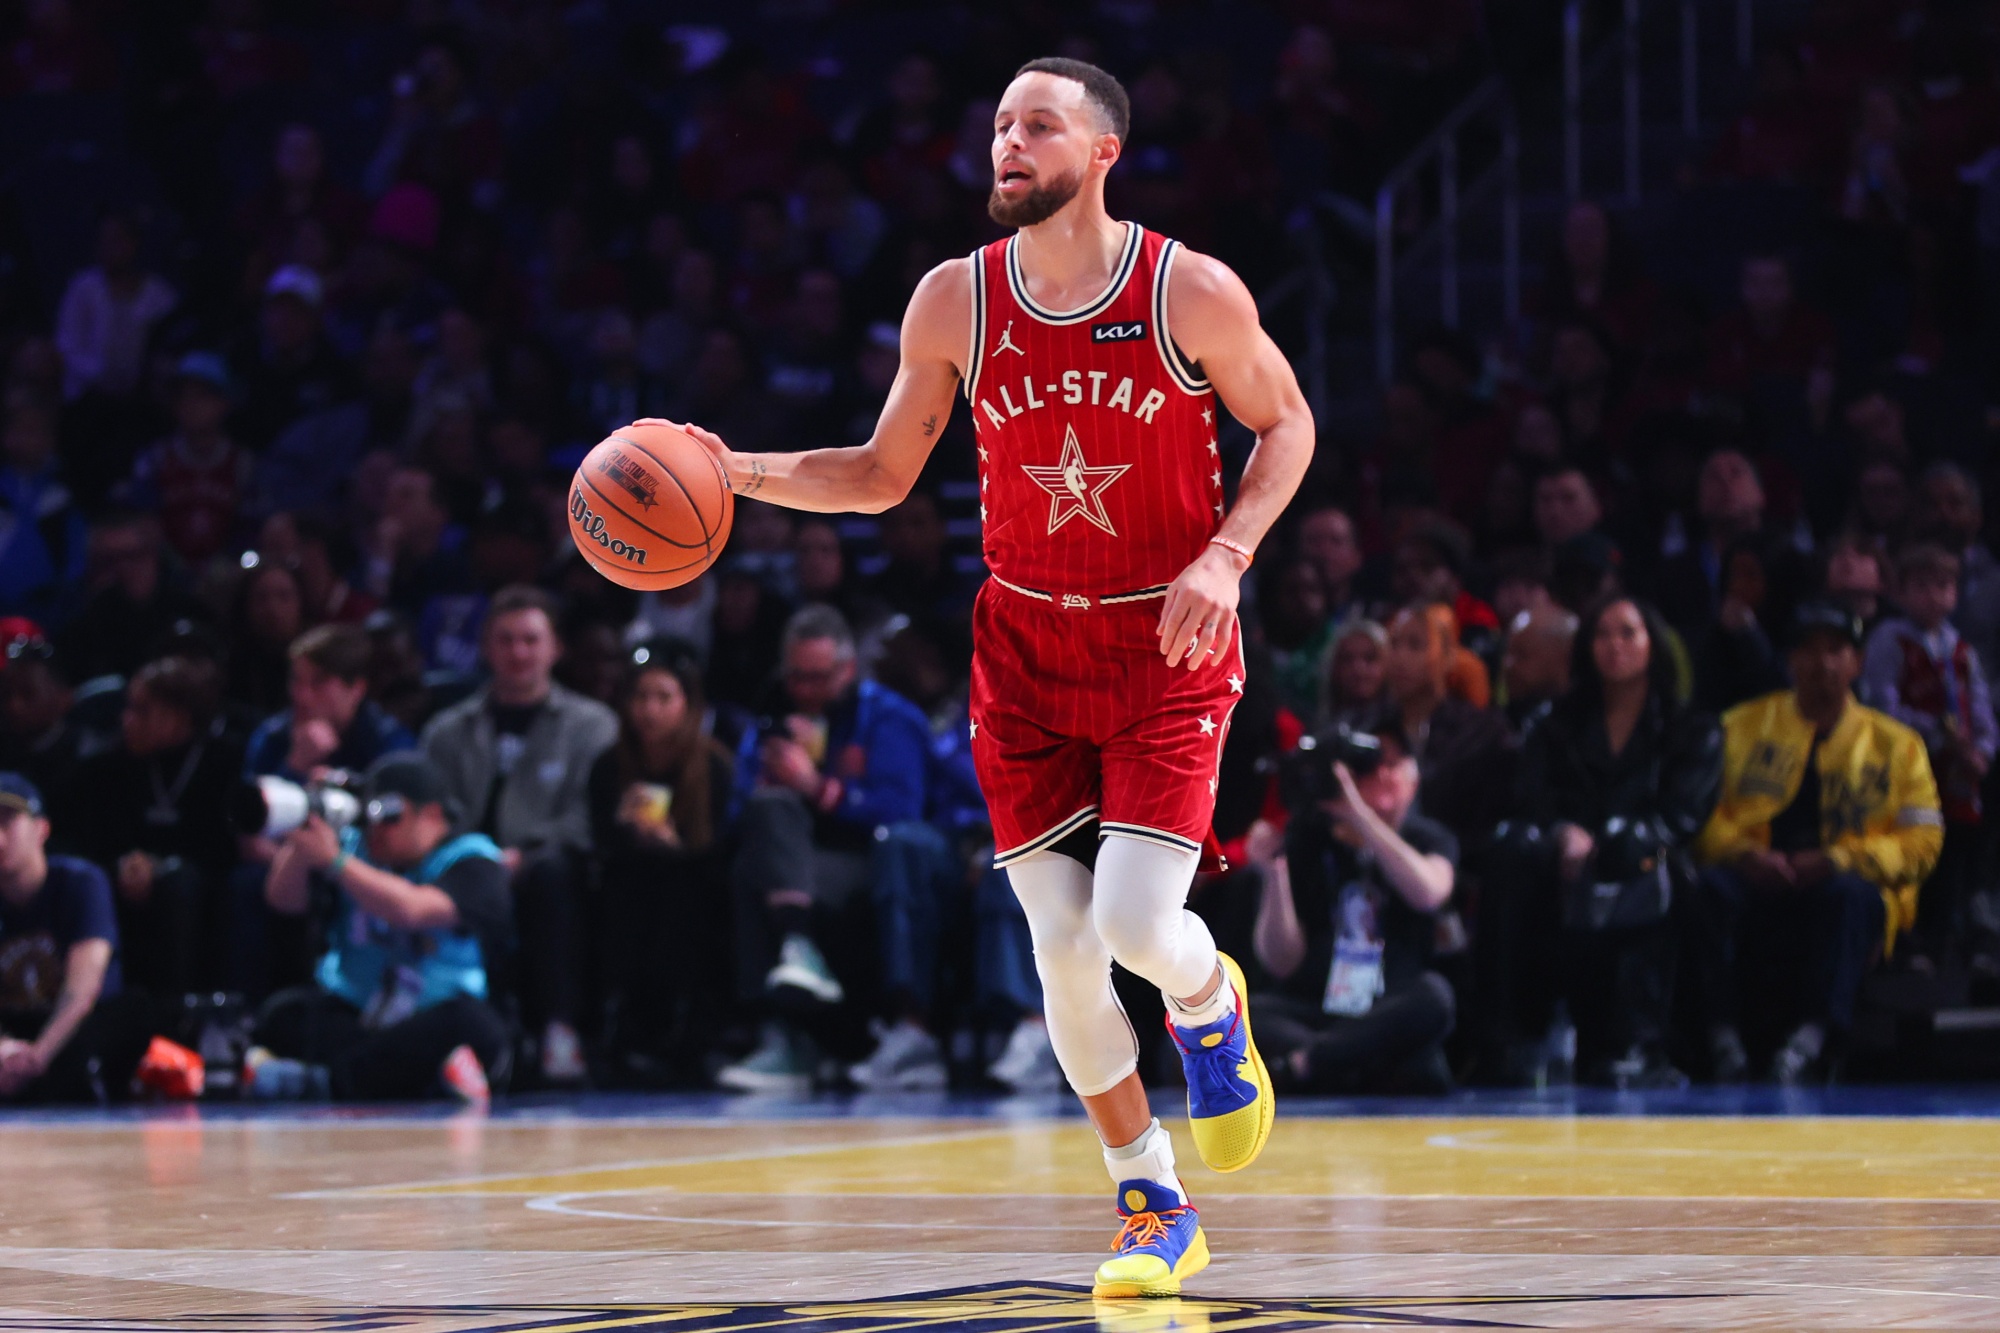 NBA News: Golden State Warriors’ Stephen Curry’s Call to Action, Reflecting on Missed Opportunities and Anticipating Change for the Team